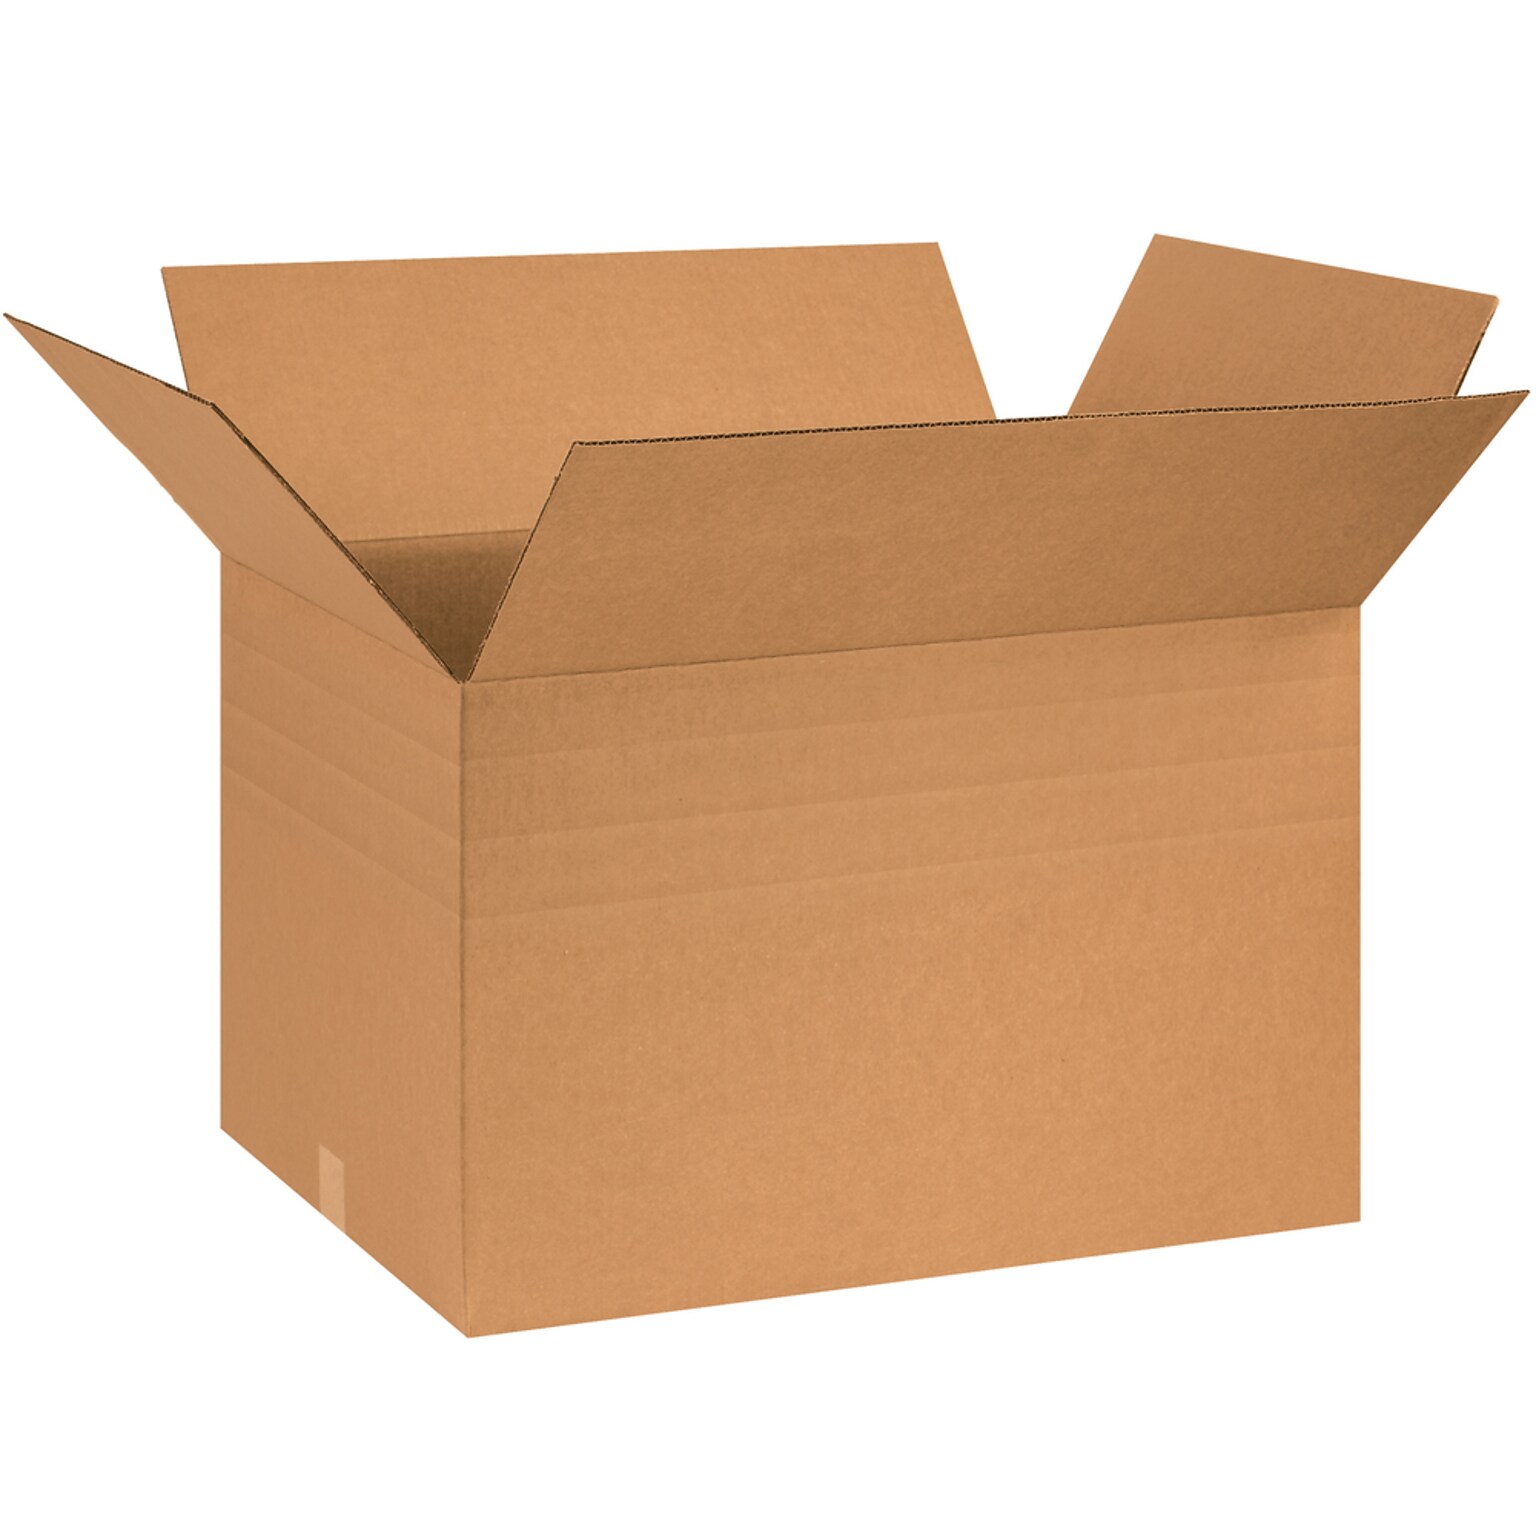 SI Products 26 x 18 x 16 Multi-Depth Shipping Boxes, 200#/ECT-32 Mullen Rated Corrugated, Pack of 10, (MD261816)